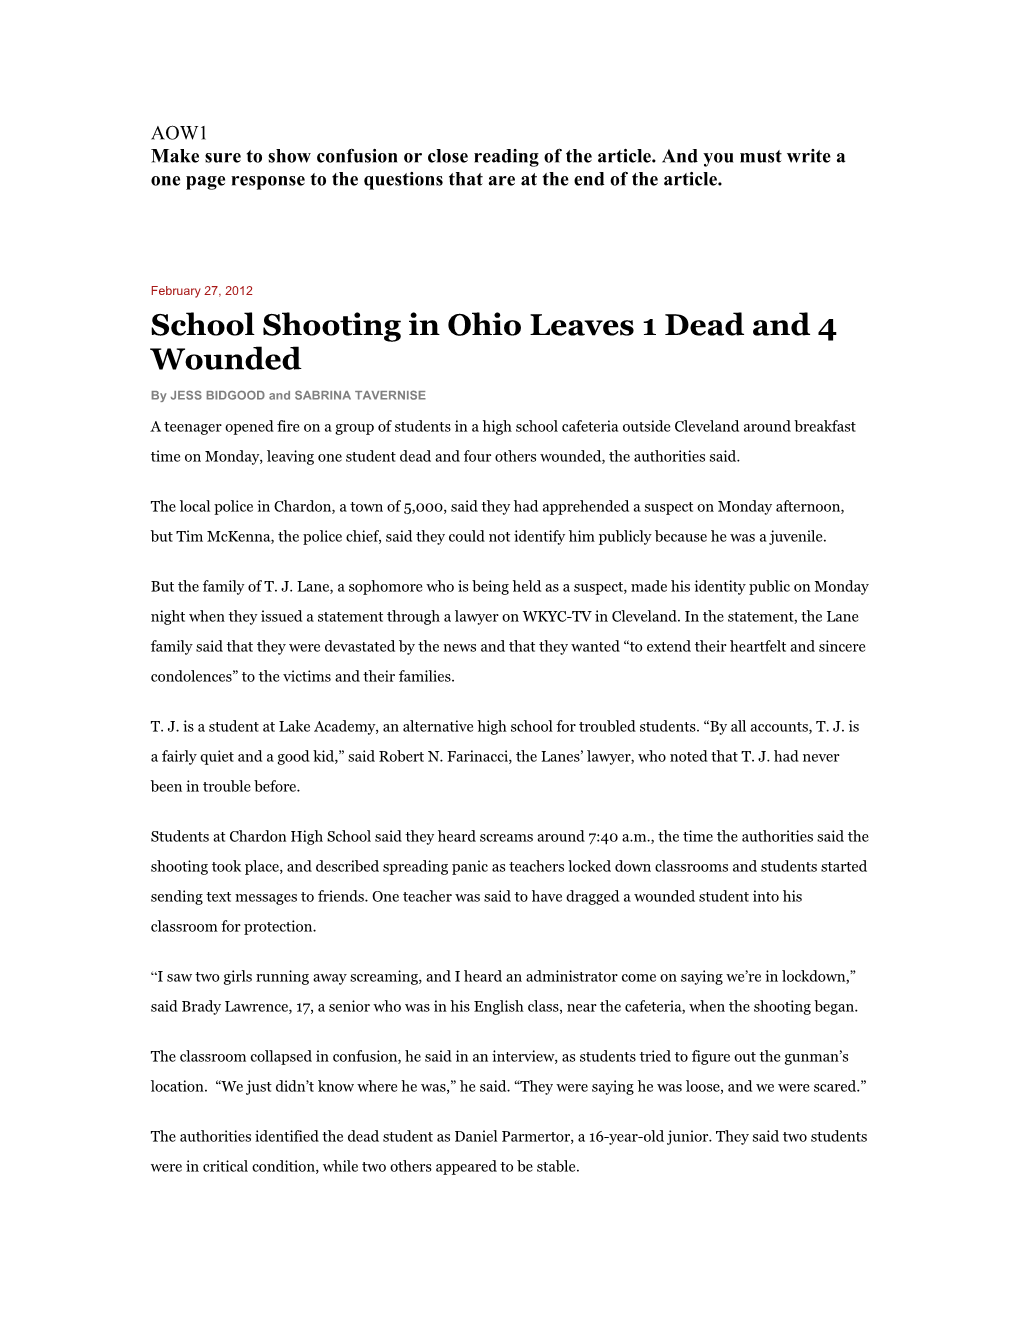 School Shooting in Ohio Leaves 1 Dead and 4 Wounded